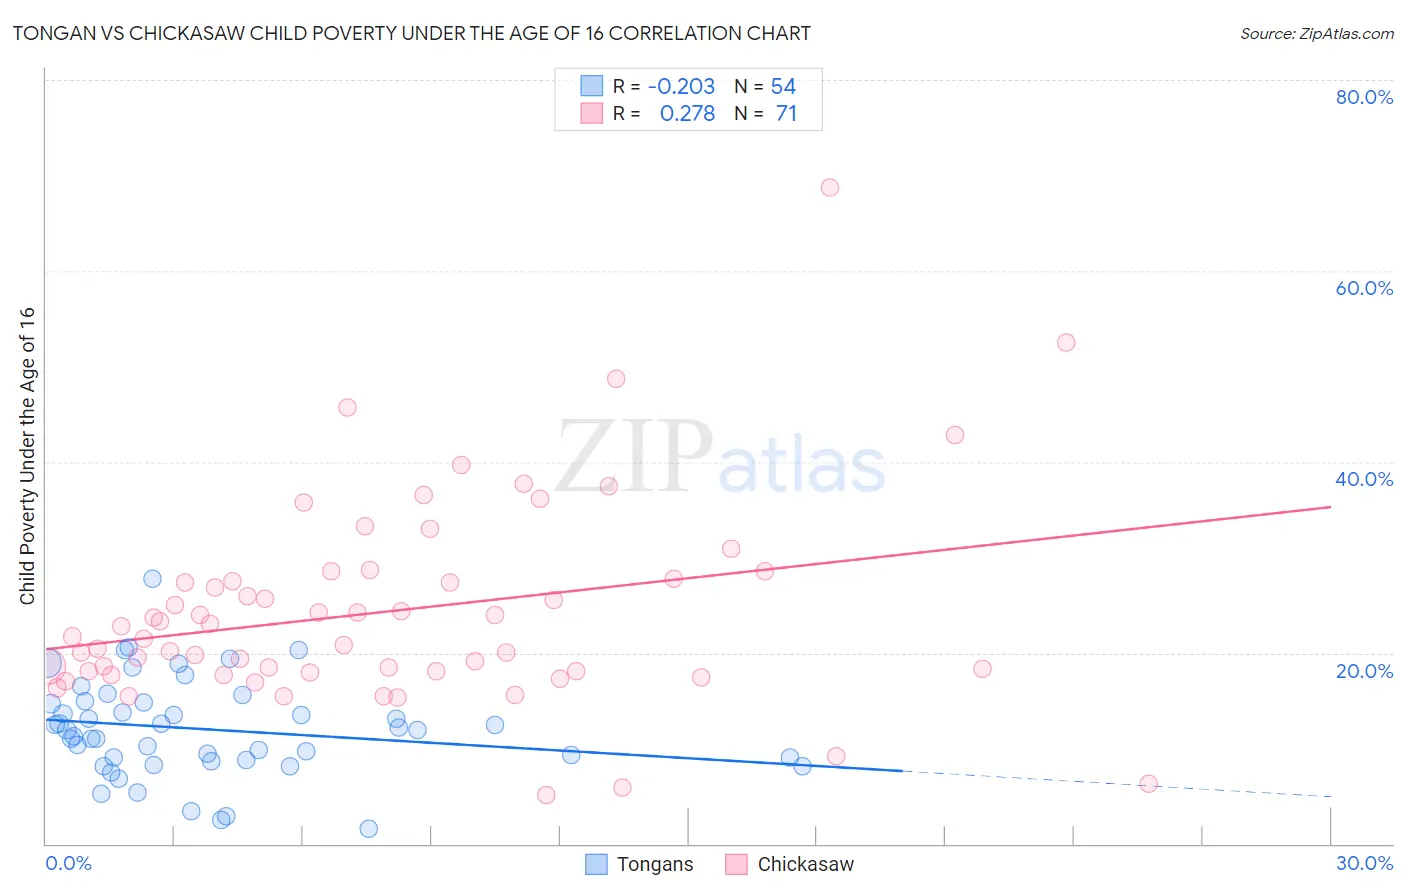 Tongan vs Chickasaw Child Poverty Under the Age of 16